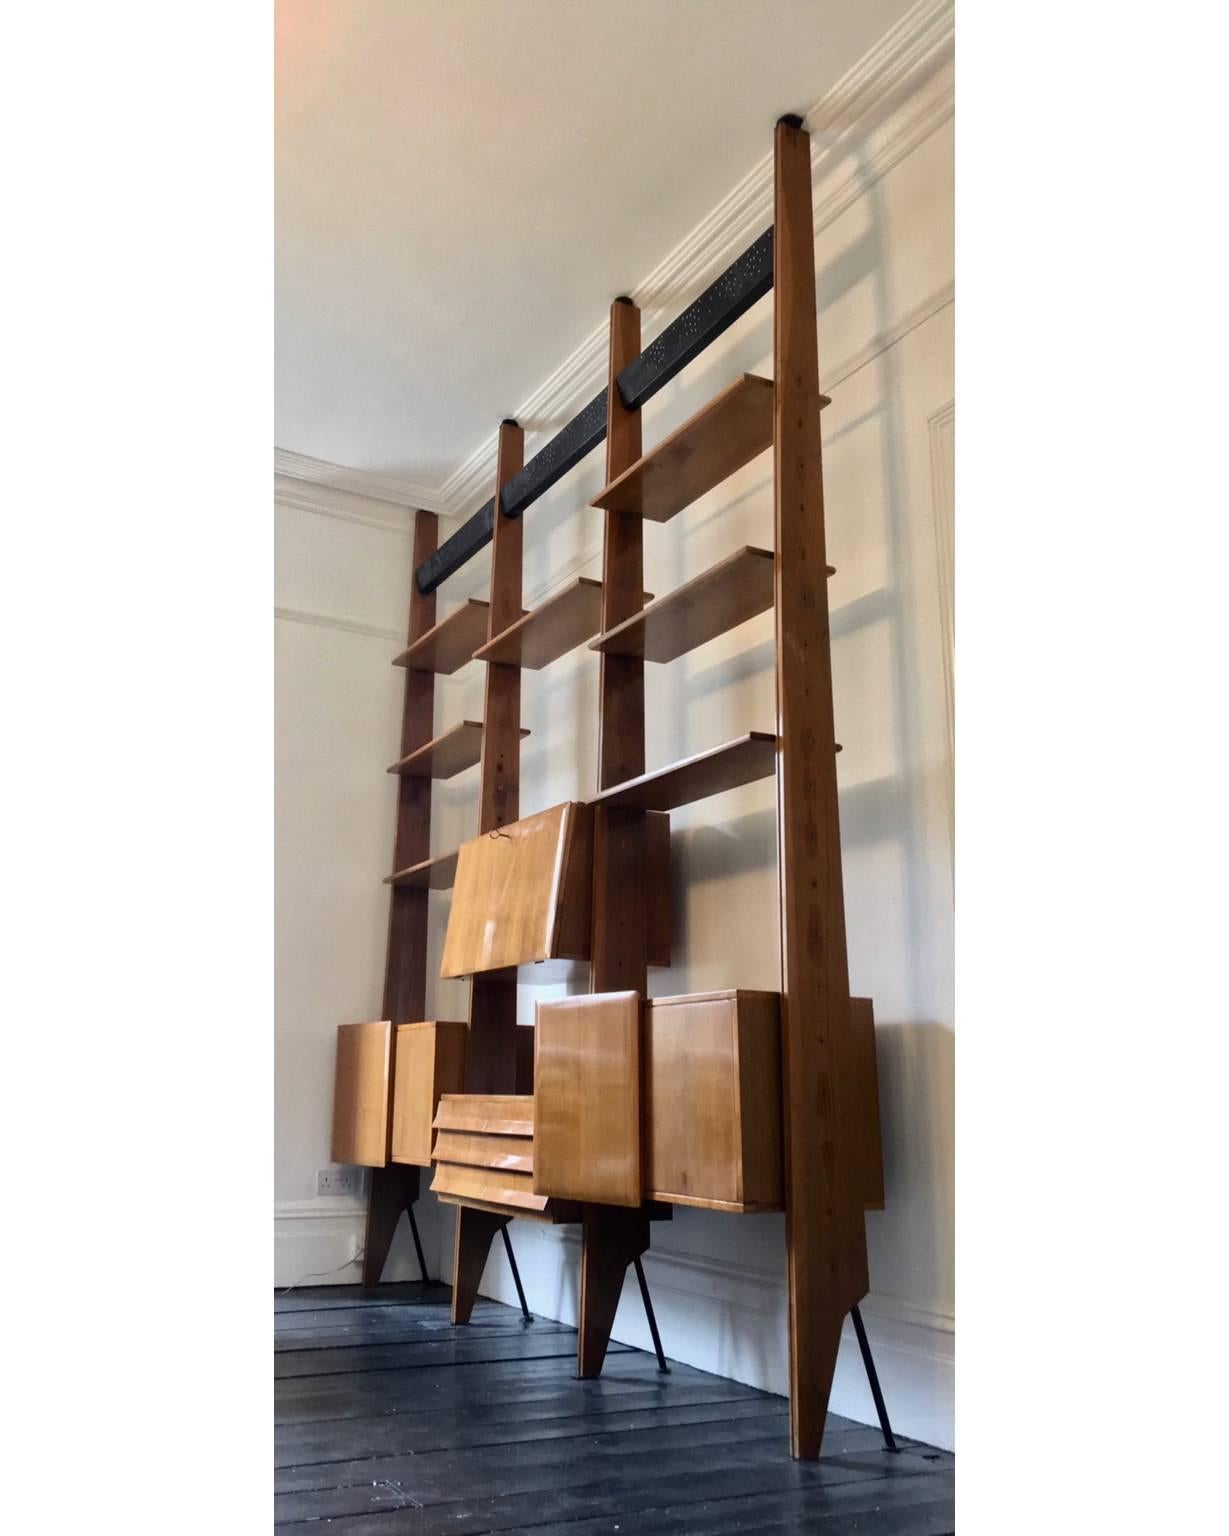 Modular shelving system or room divider attributed to Dassi of Milan, Italy 1950s.

A sophisticated design with lots of interesting detail.  The set comprises components as follows:
- four tapering uprights of wood with steel feet and brass